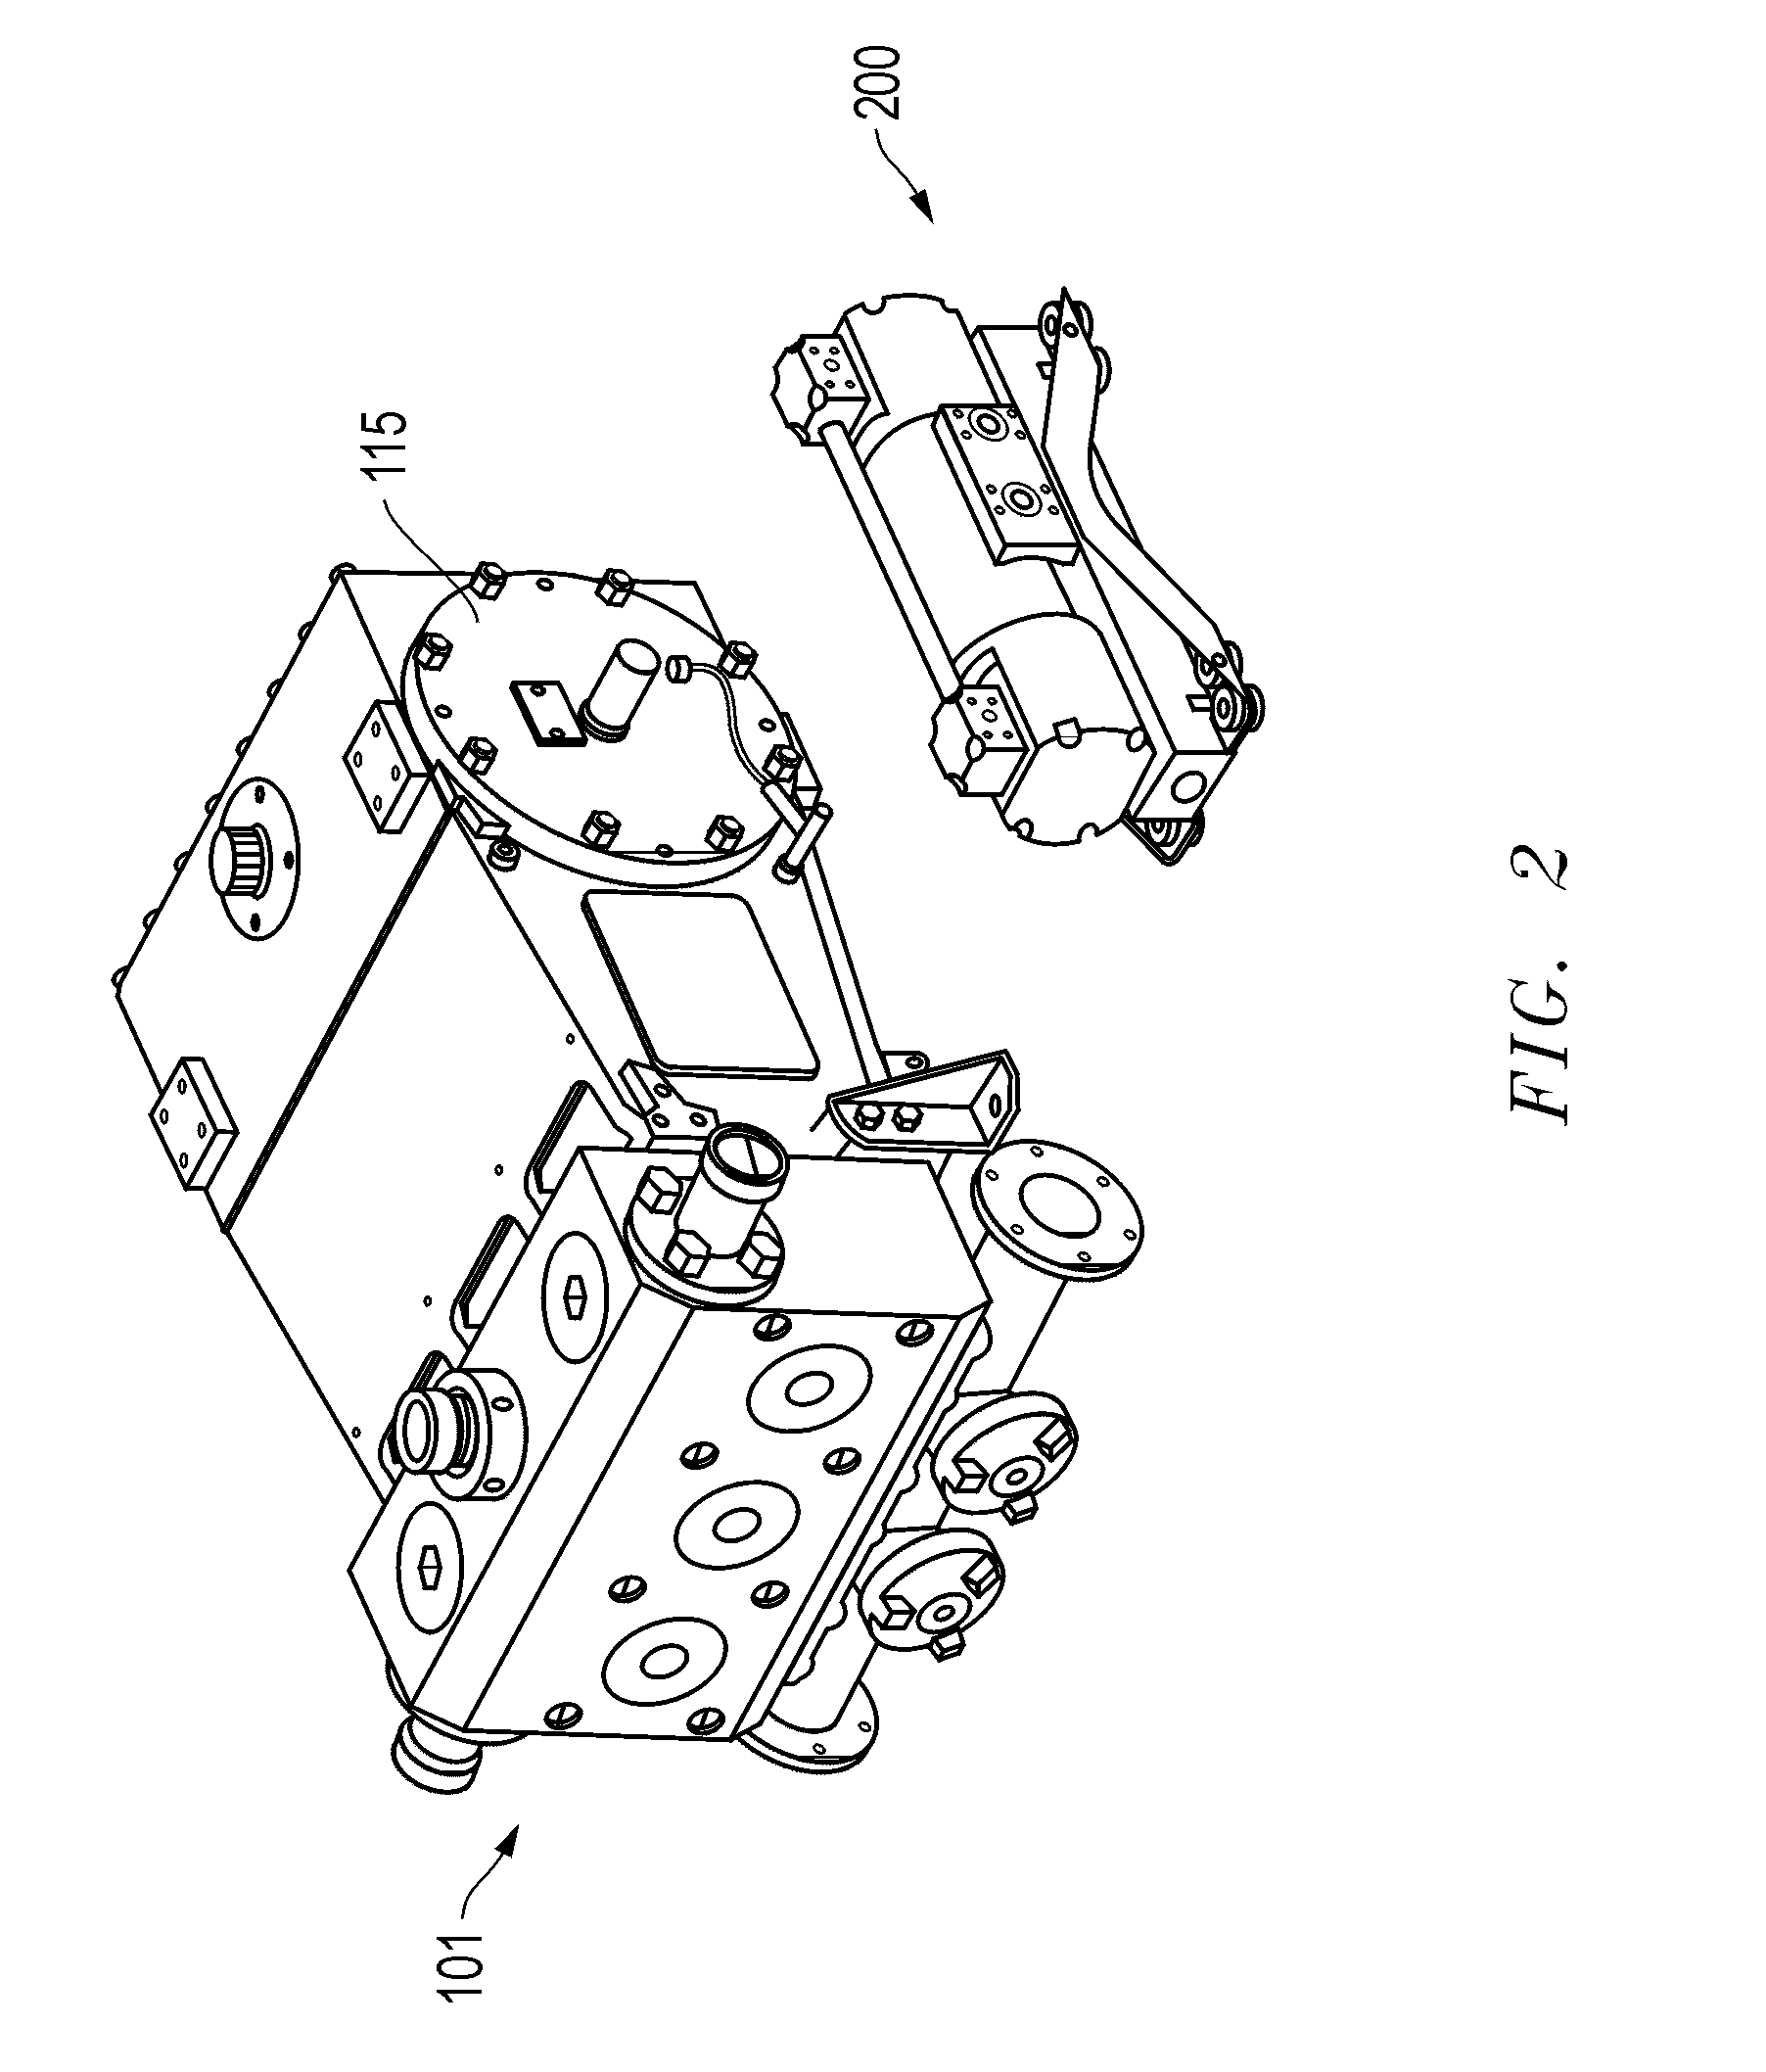 Integrated well access assembly